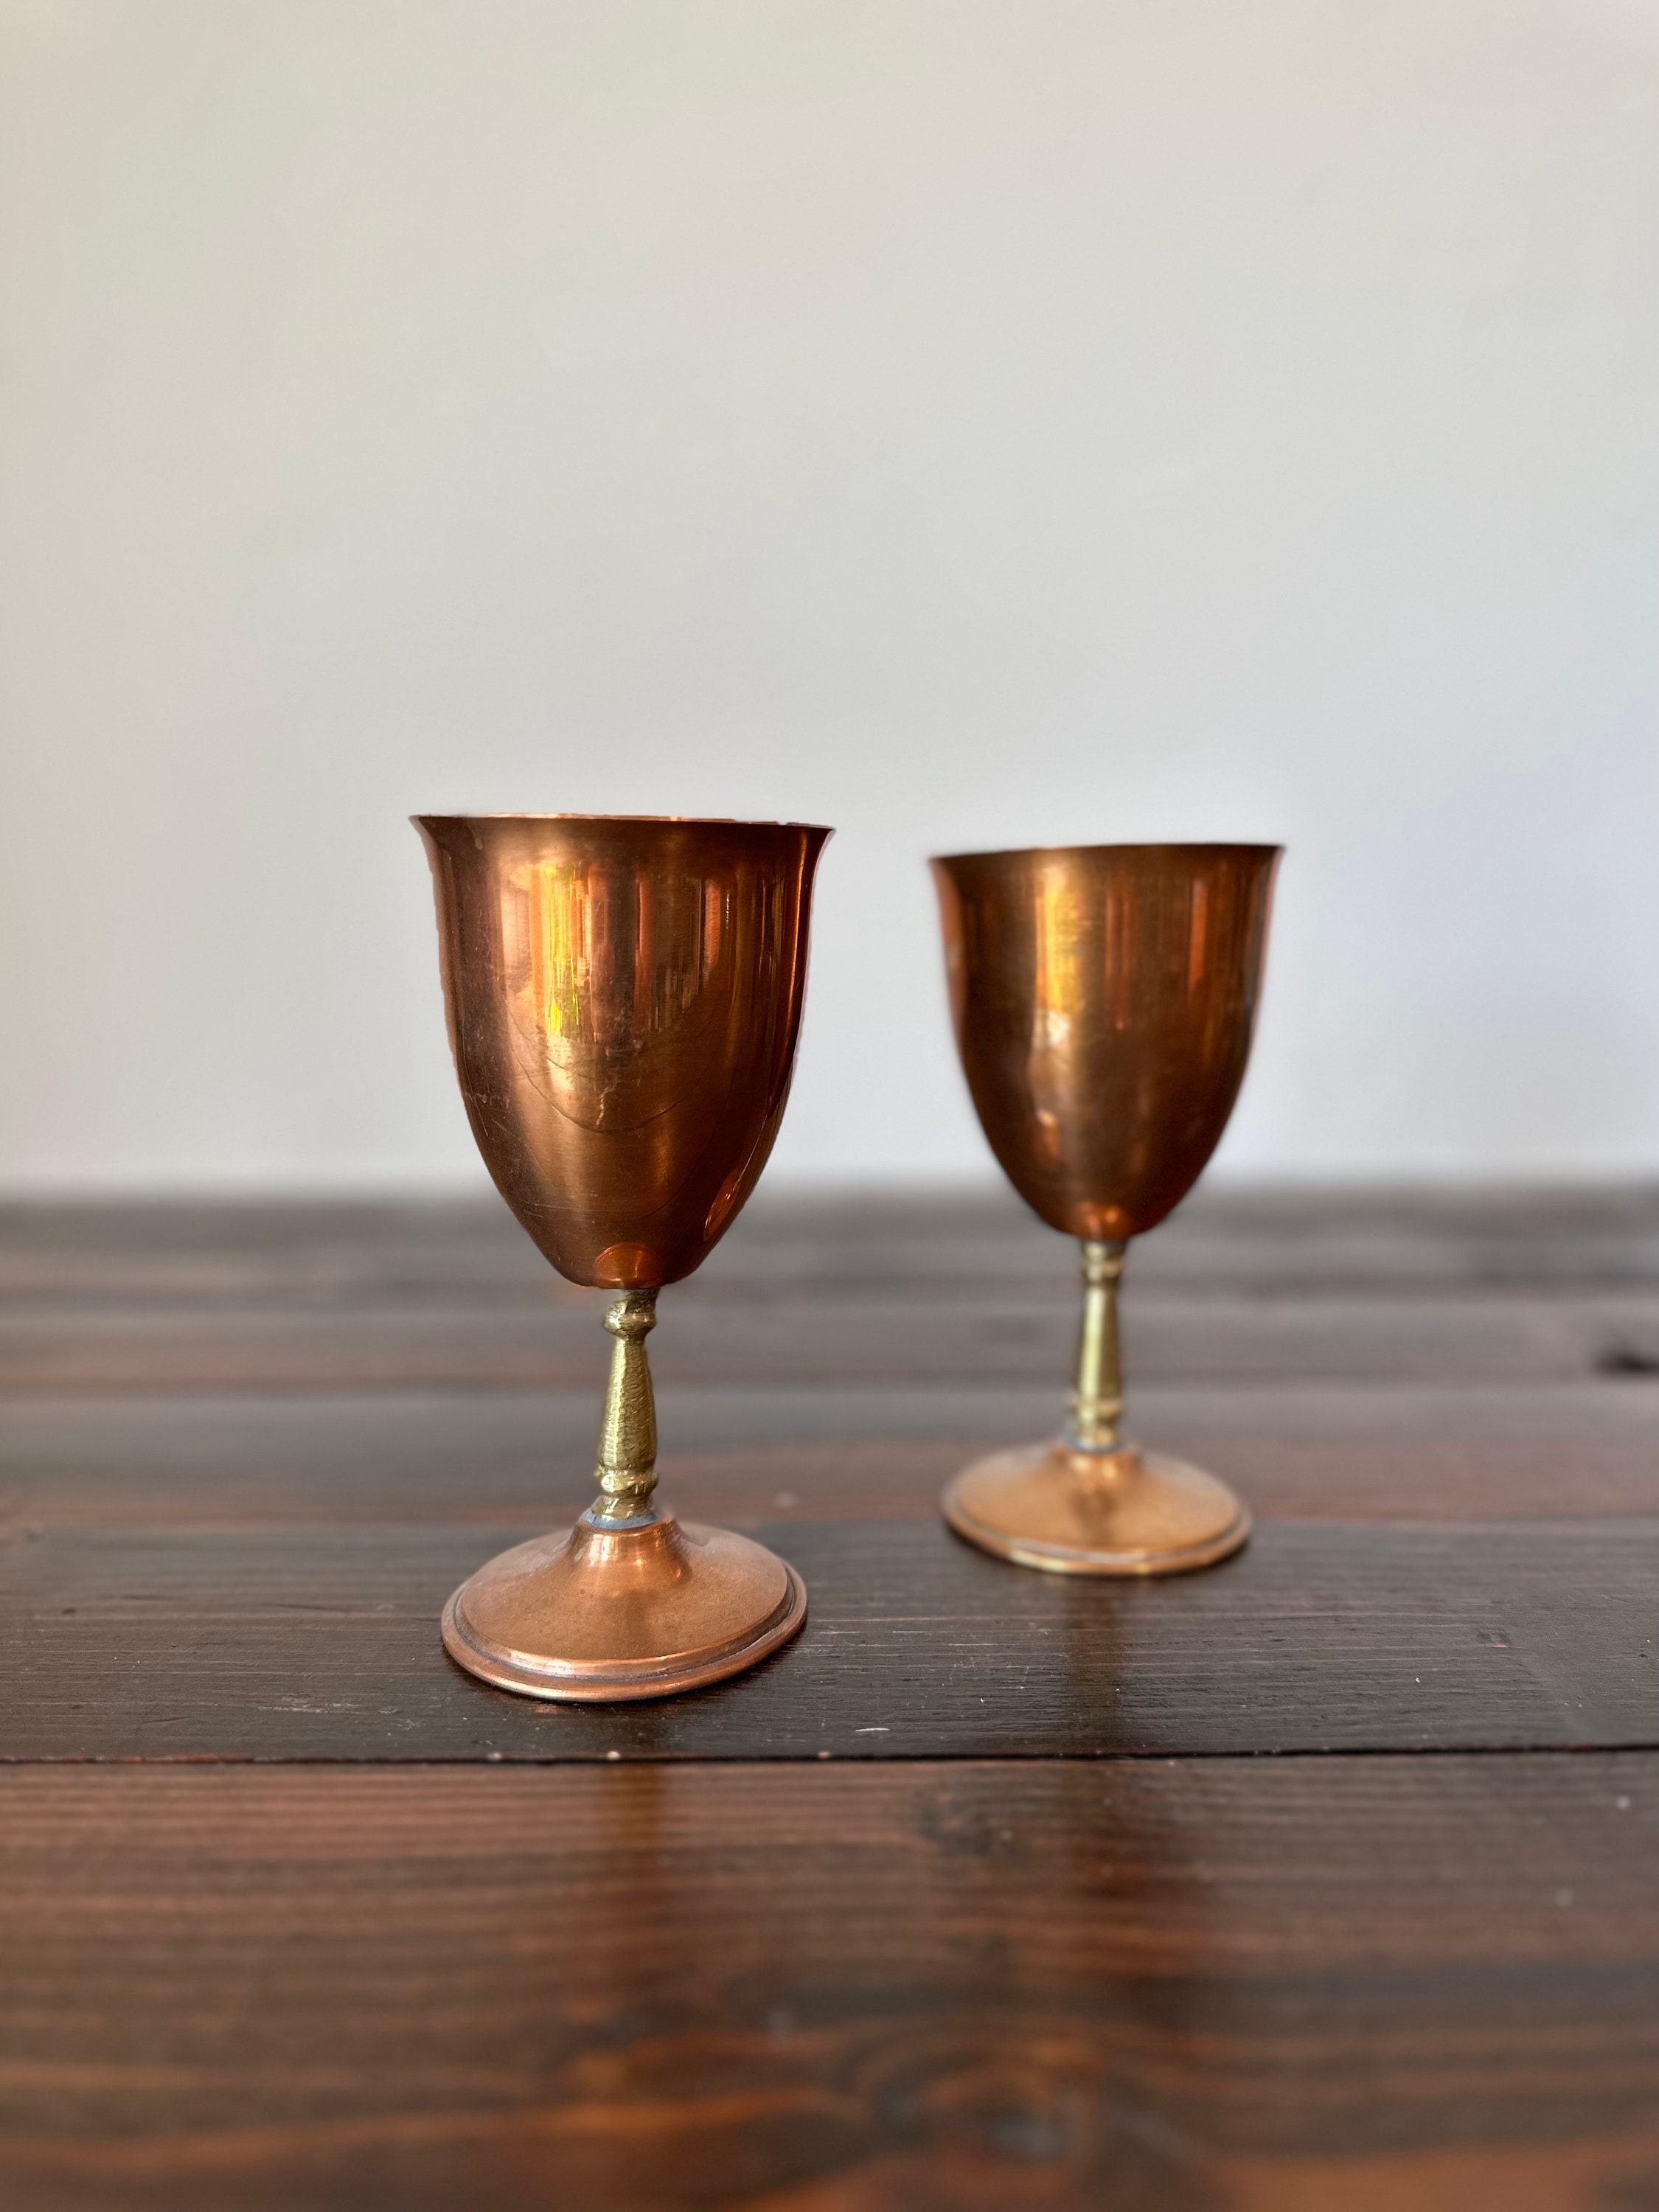 2 Vintage Solid Brass Wine Goblets With Tulip Stems Made in India